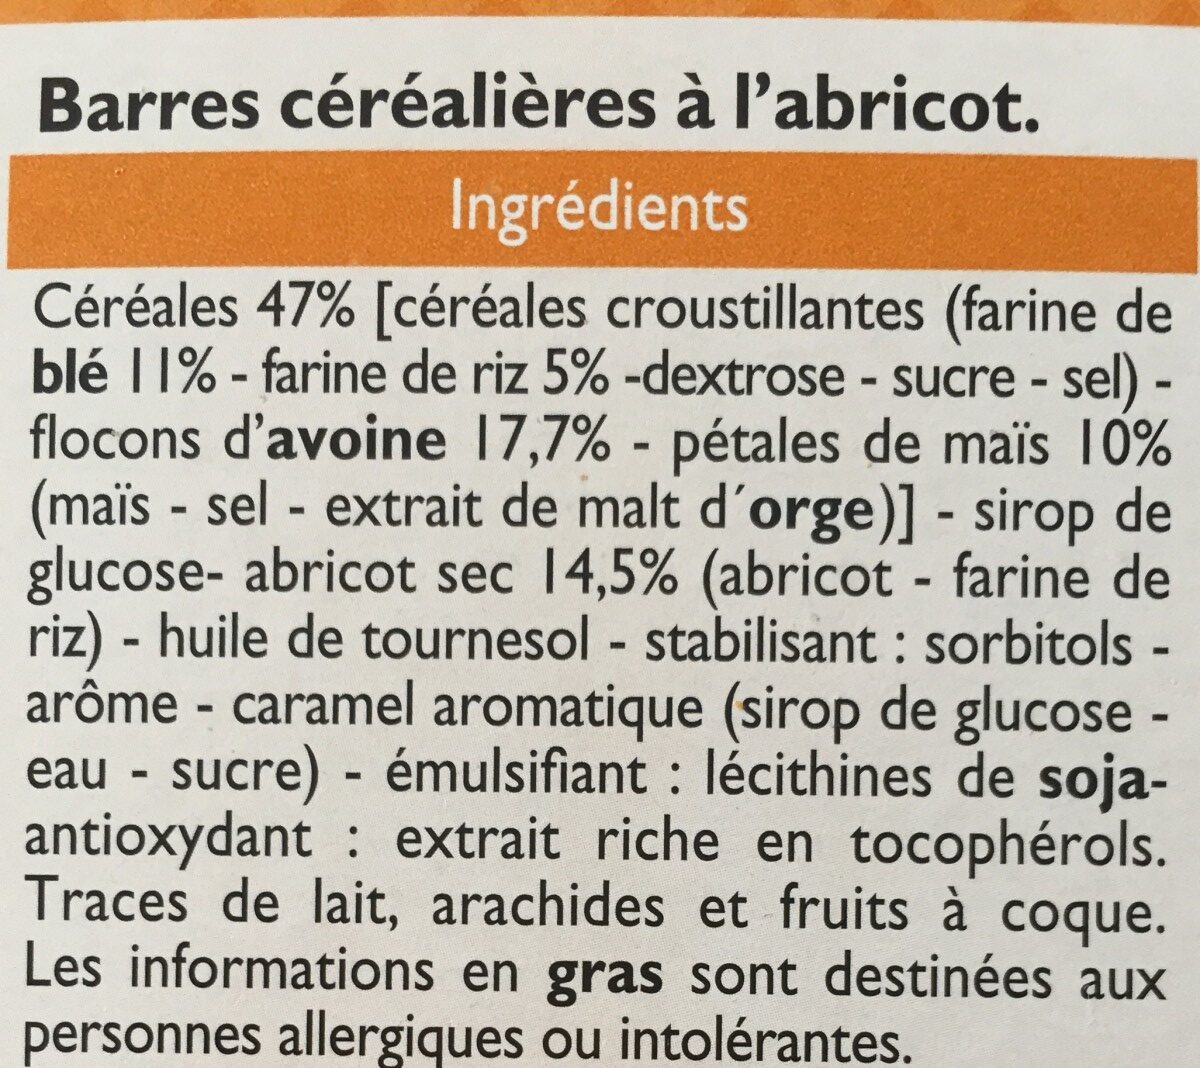 Barres cerealieres abricot - Ingredients - fr